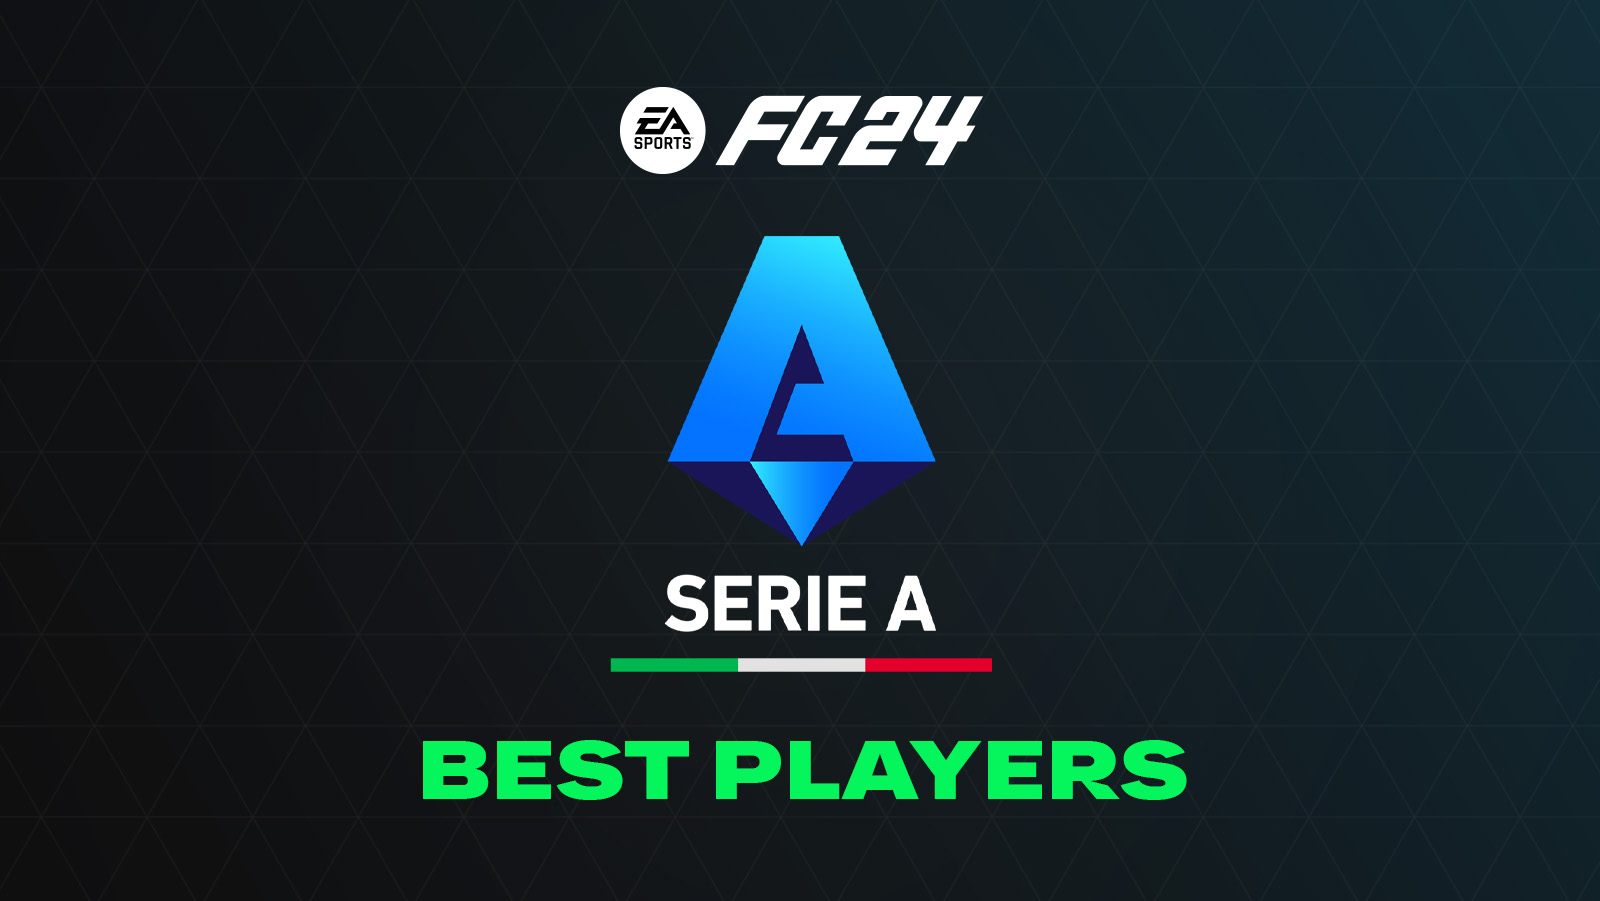 FC 24 Top Players from Serie A